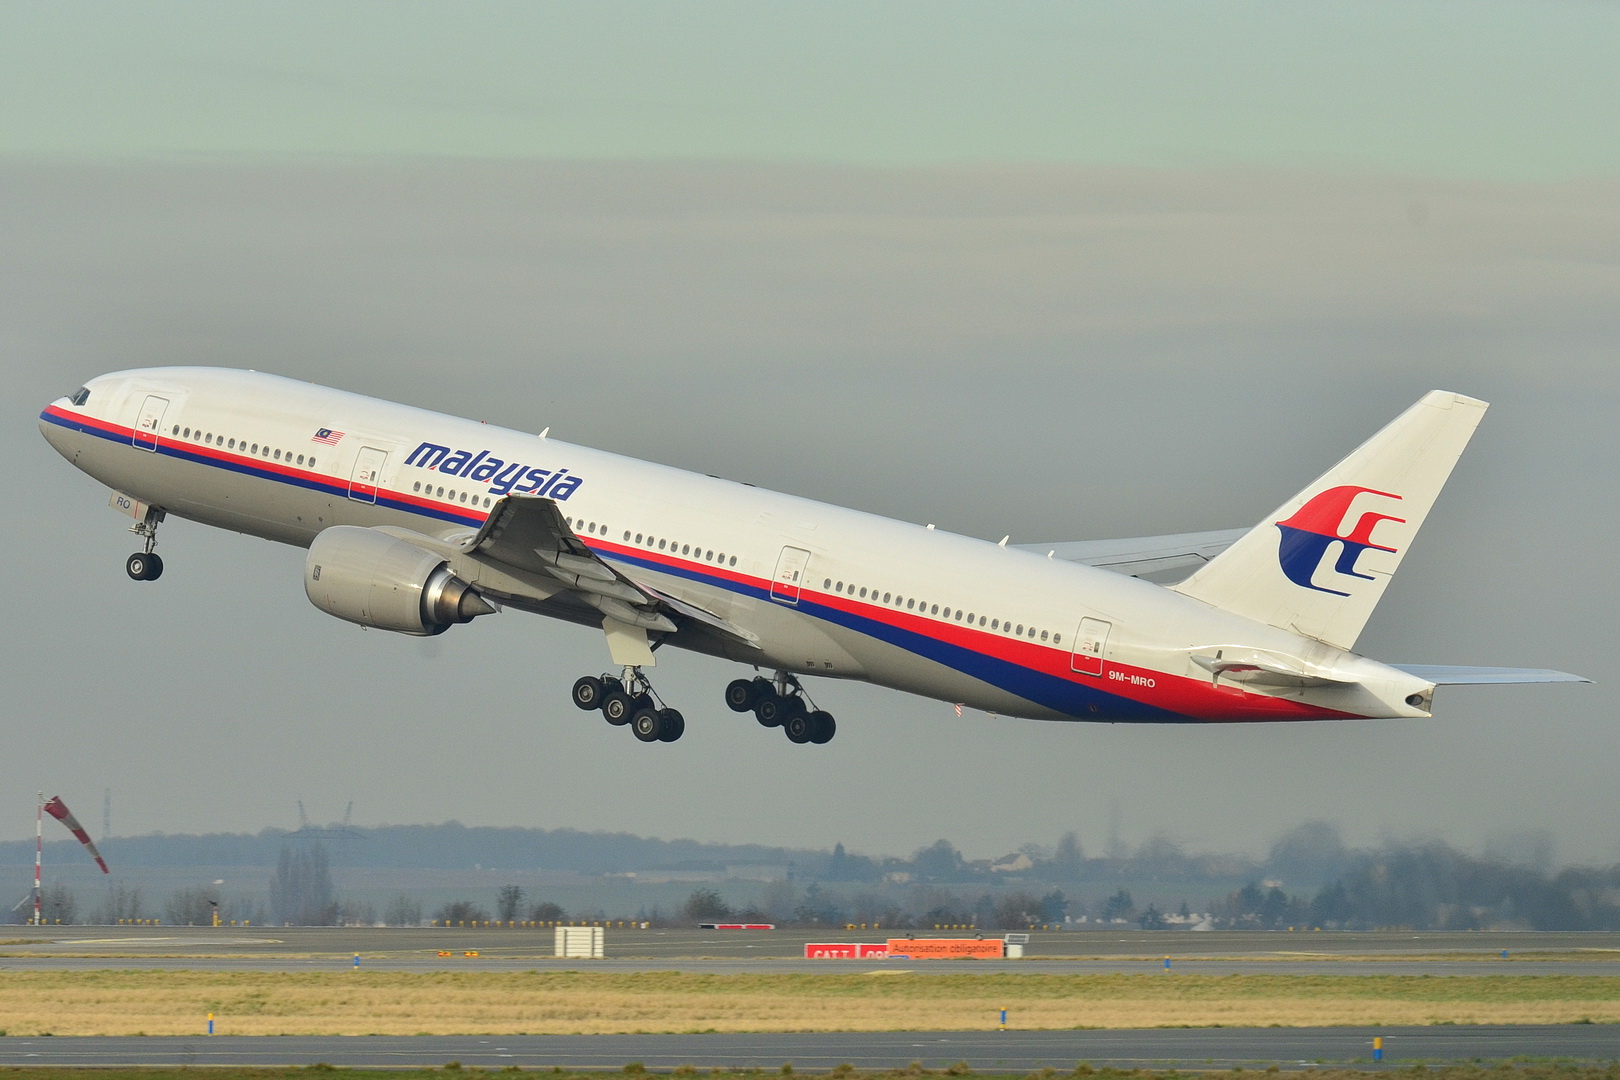 MH370: The Plane That Disappeared - Review